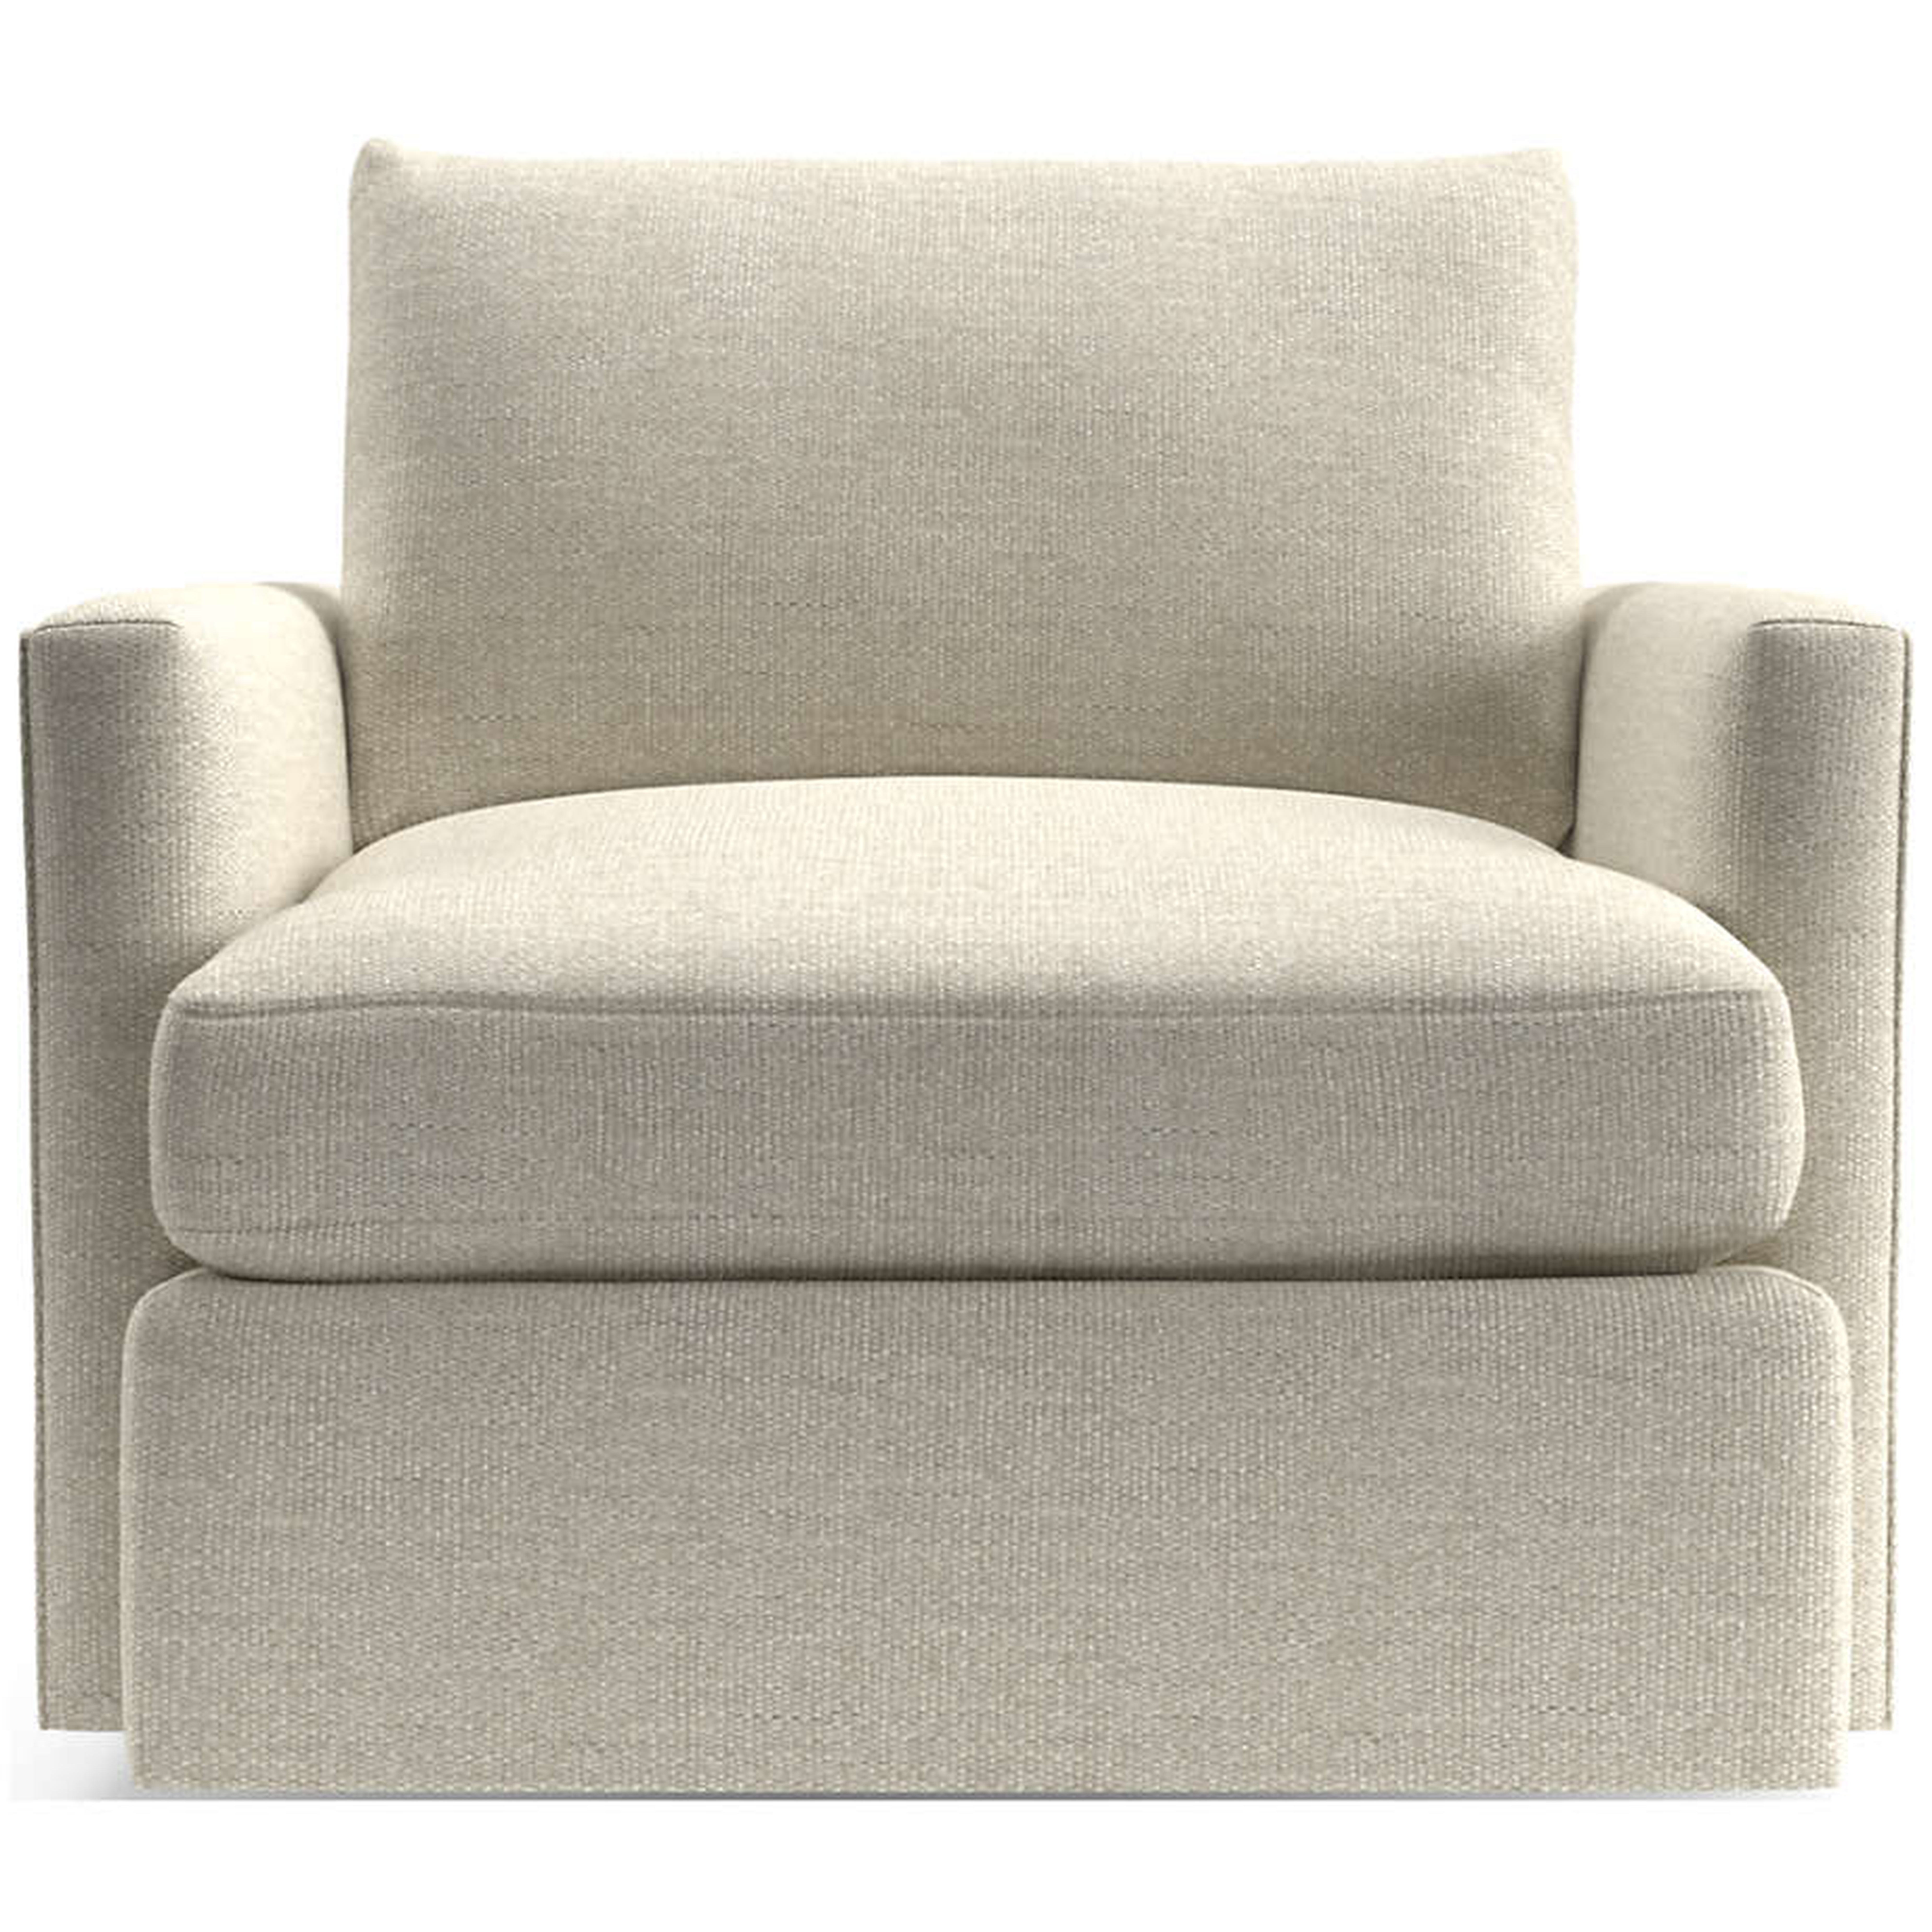 Lounge 360 Swivel Chair - Crate and Barrel